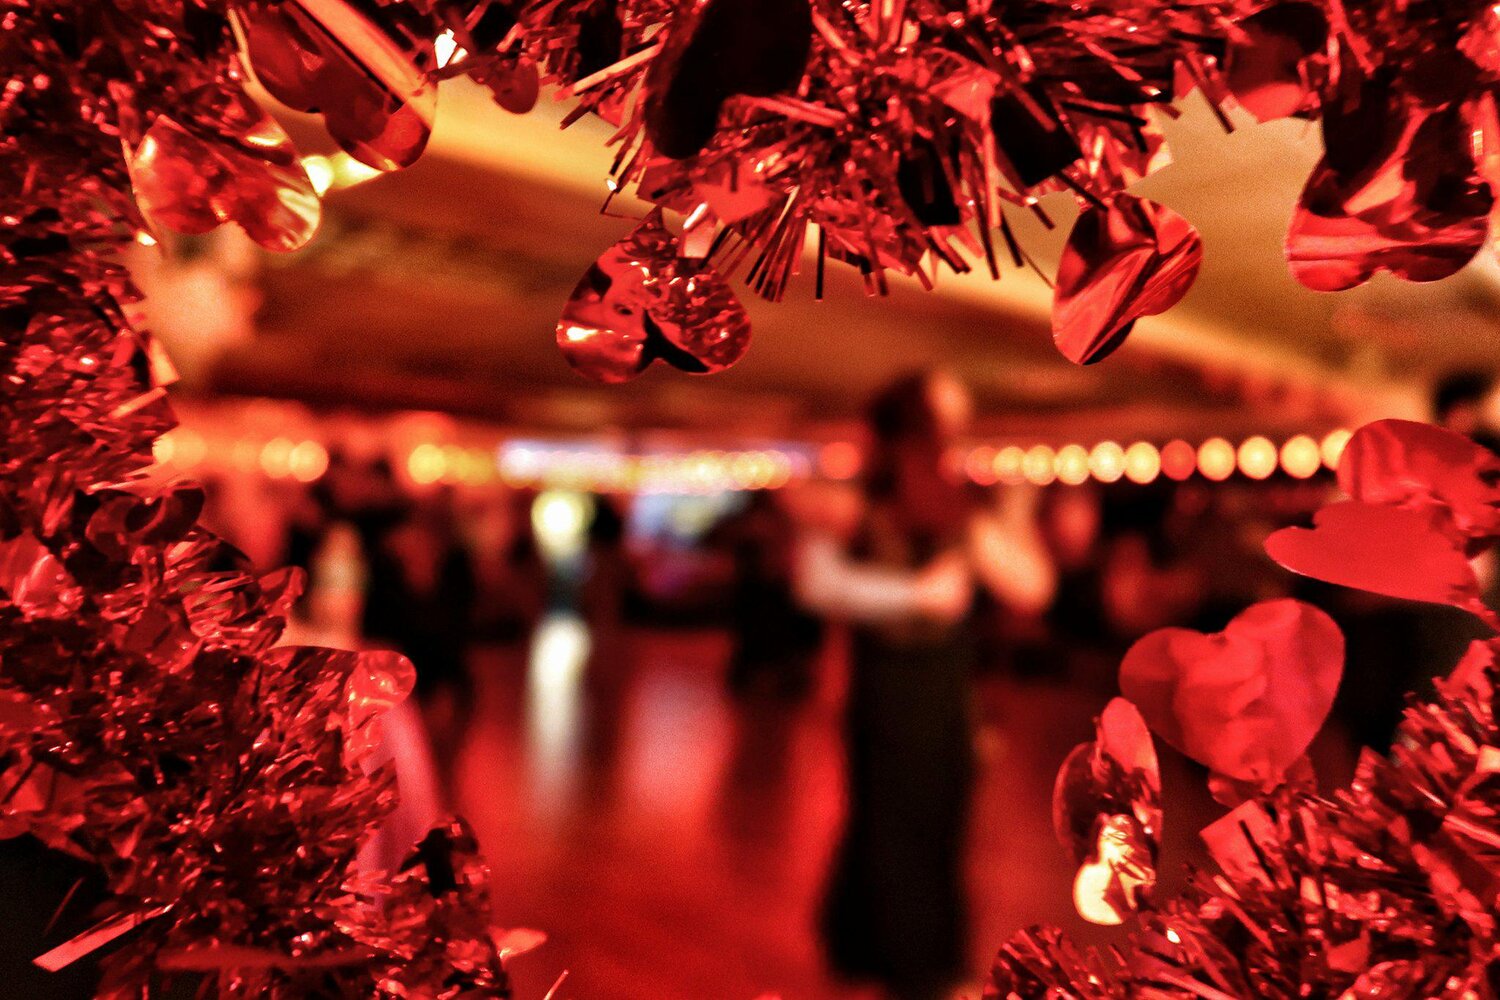 Valentine Milonga at Ultimate Tango with live music and festive decorations created a lot of good vibes and internal happiness.